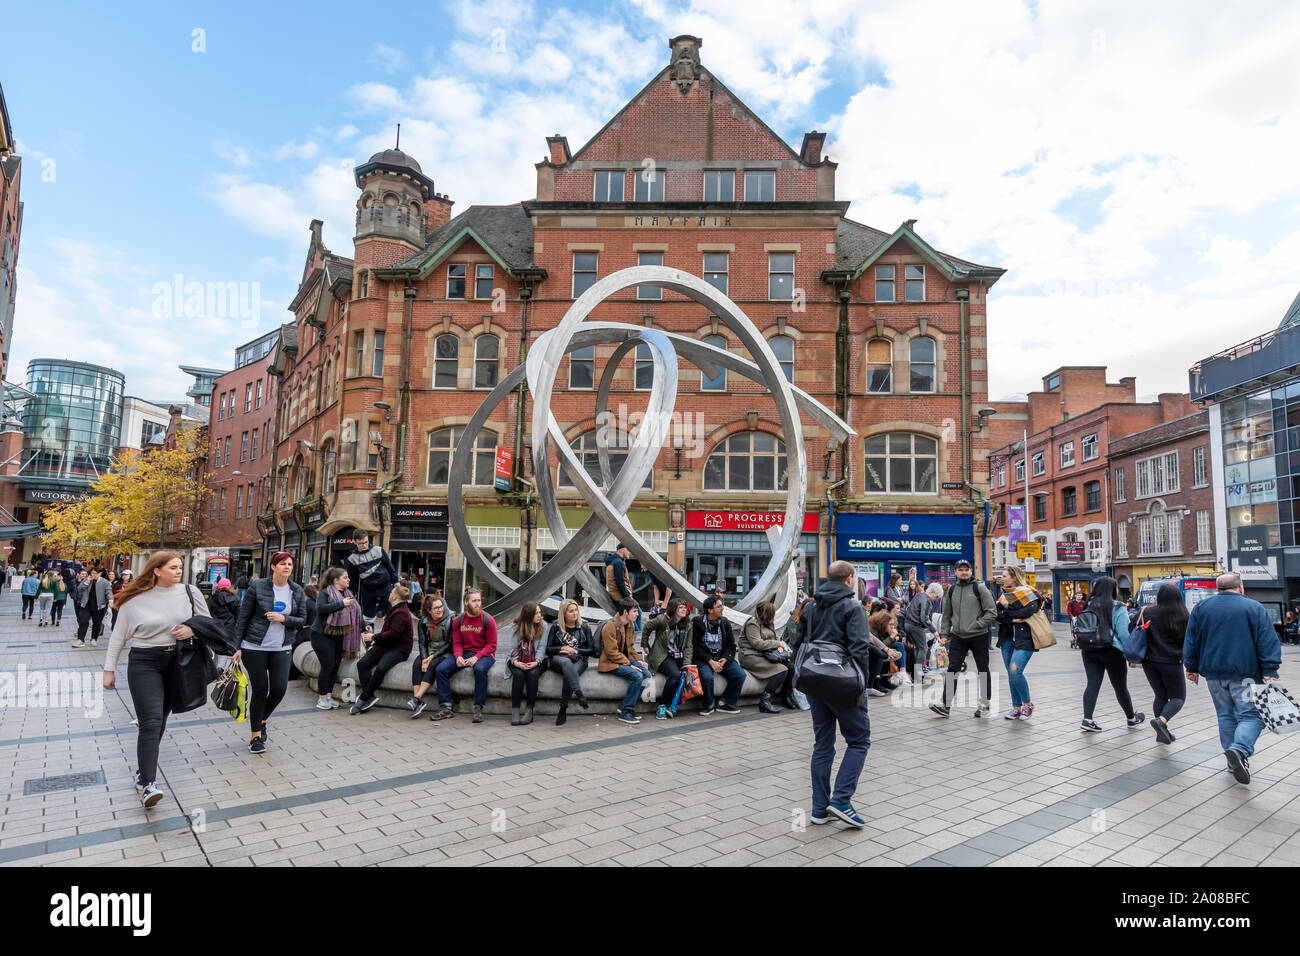 People and pedestrians walking about and enjoying themselves by Williams Street South surrounded by many retail stores in Belfast, Northern Ireland. Stock Photo